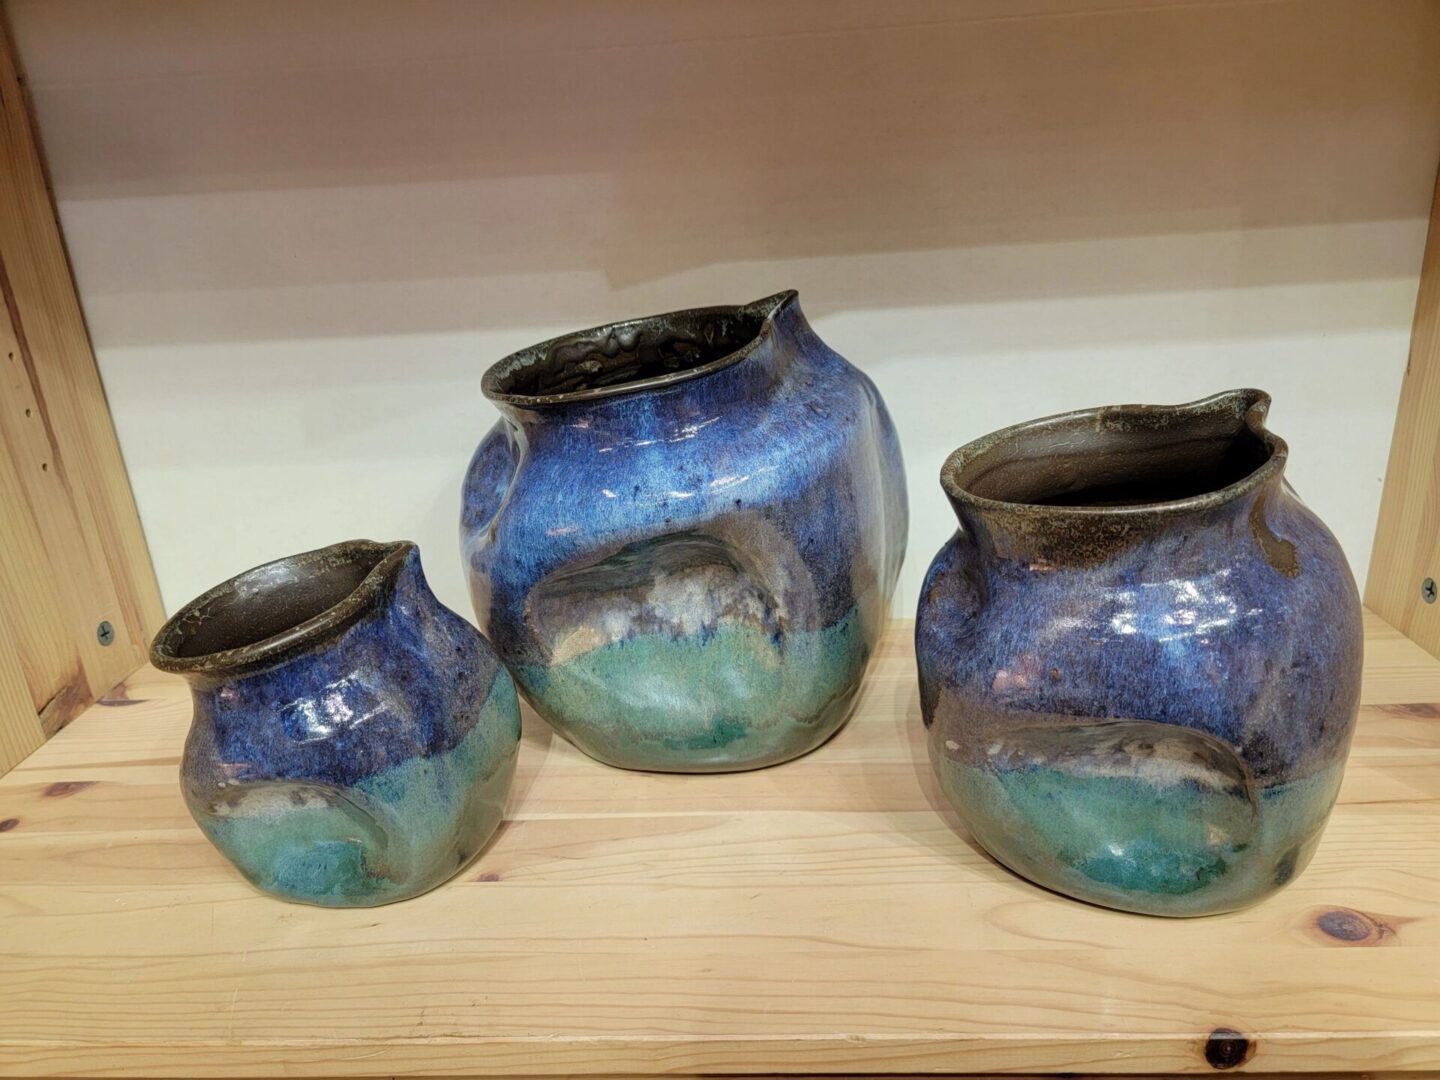 Three vases are shown on a shelf.